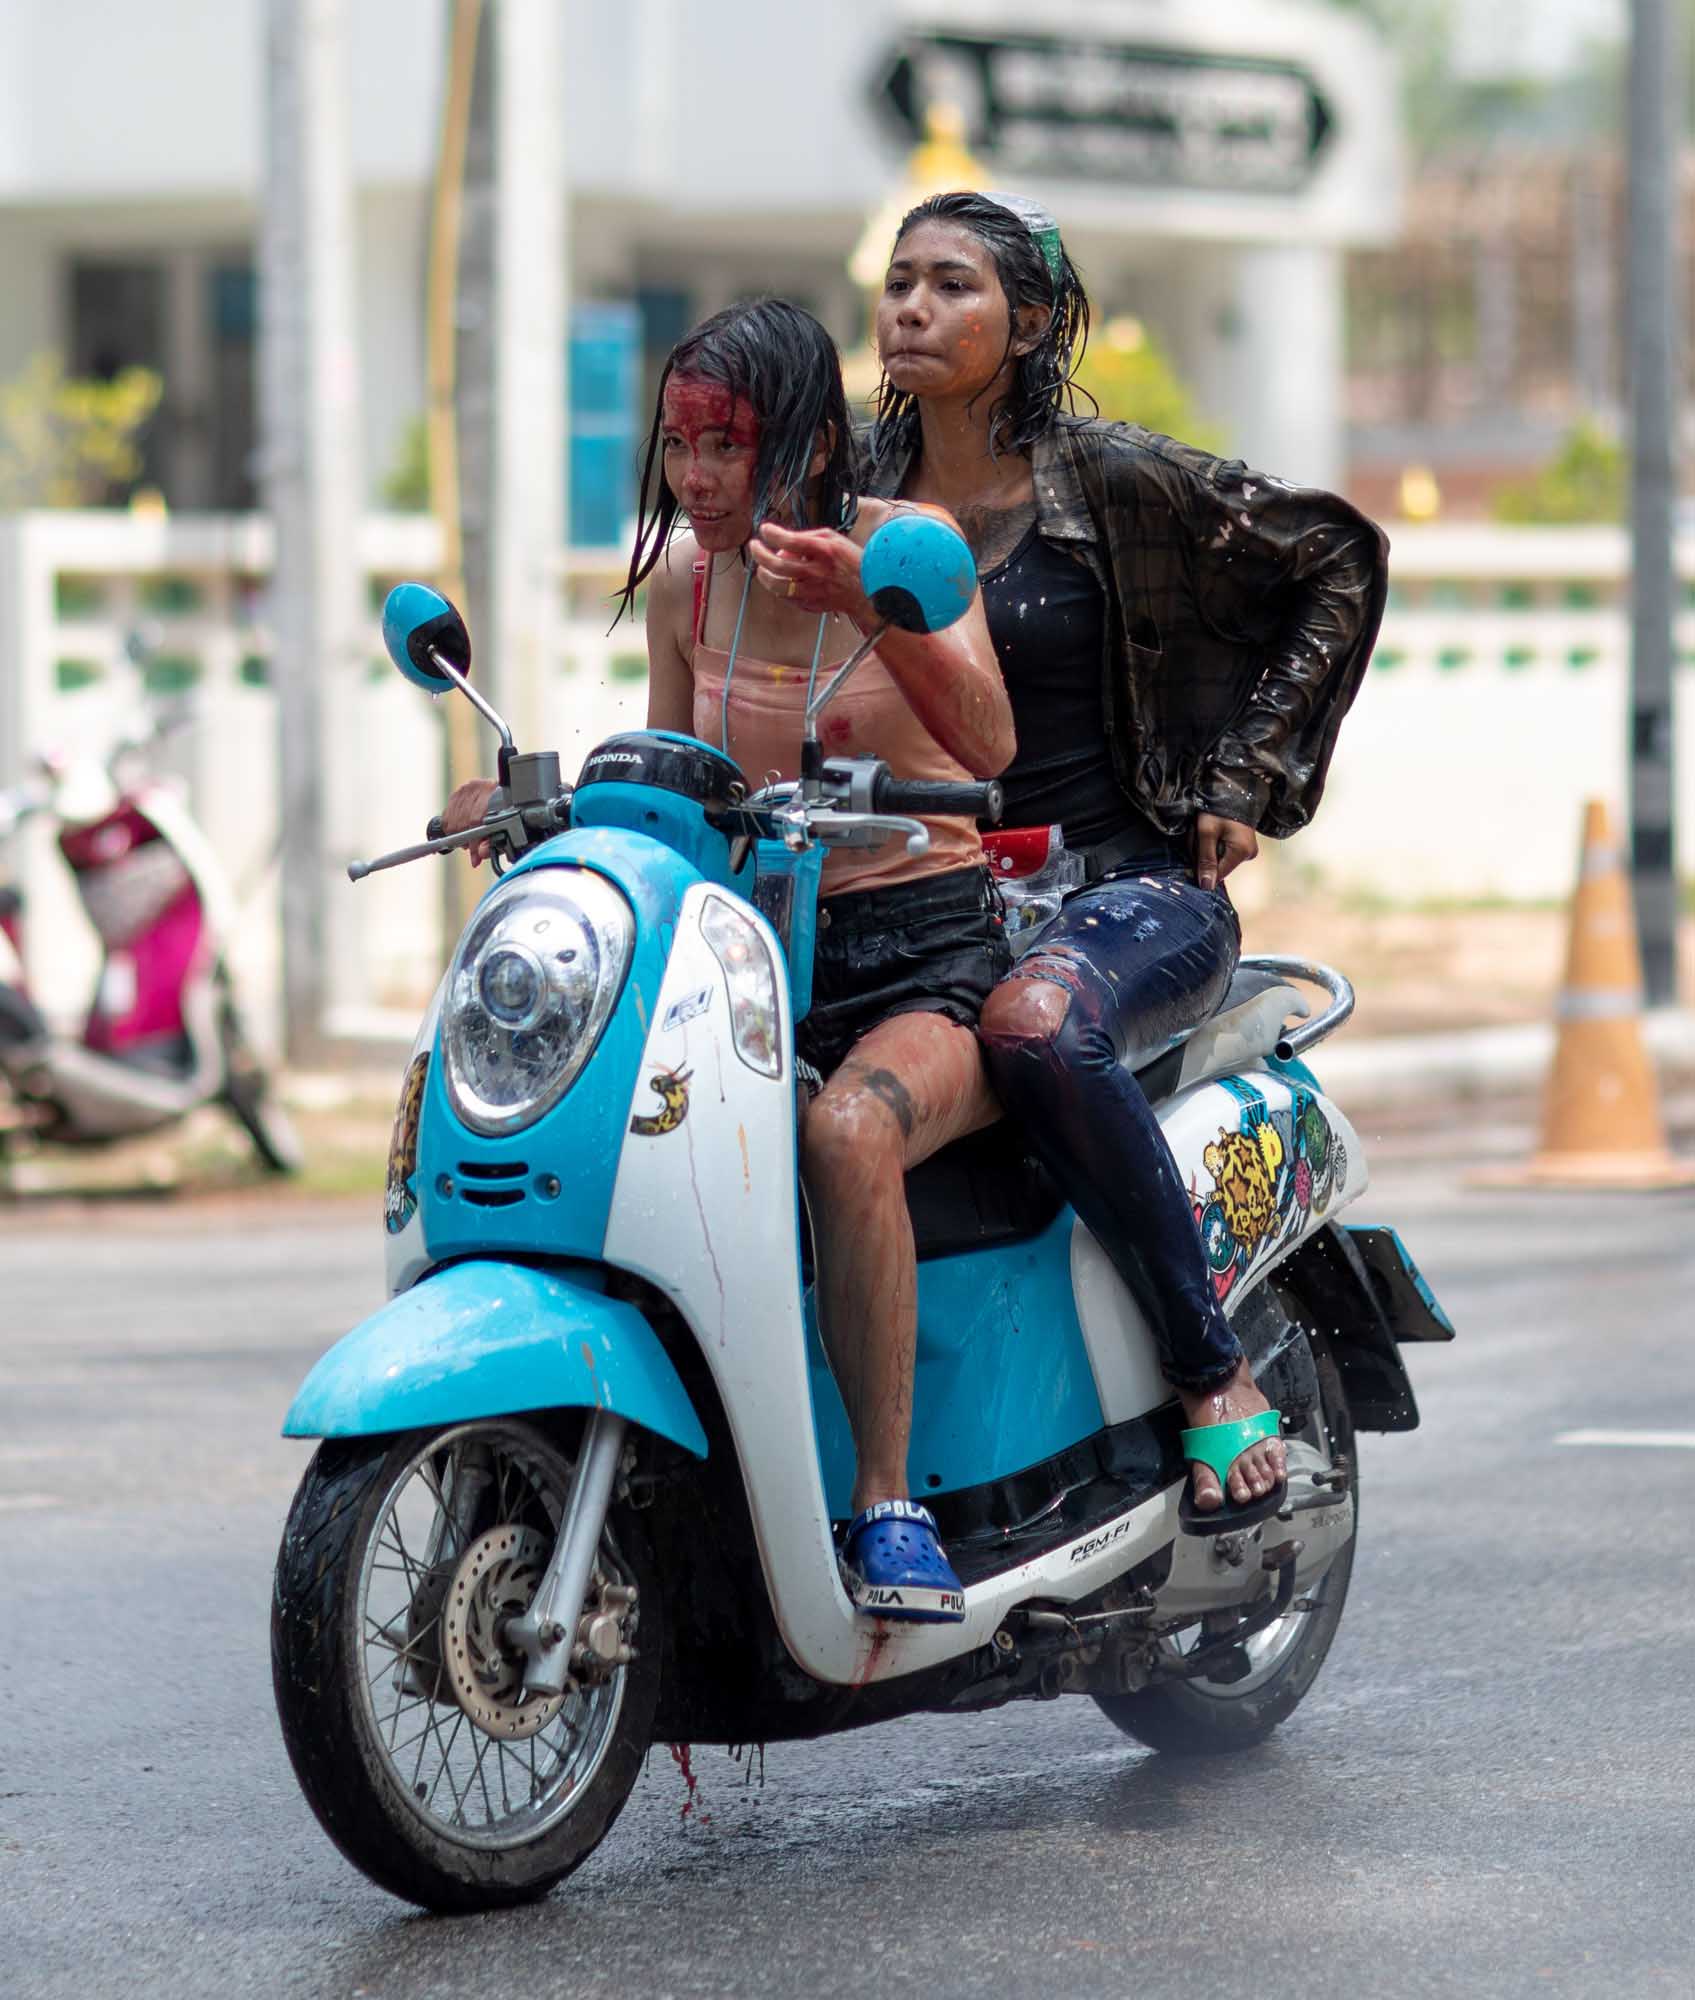 Two women with painted faces on motorcycle during Songkran water festival in Phuket, Thailand | Street Photography | Travel Photography | Festival Photography